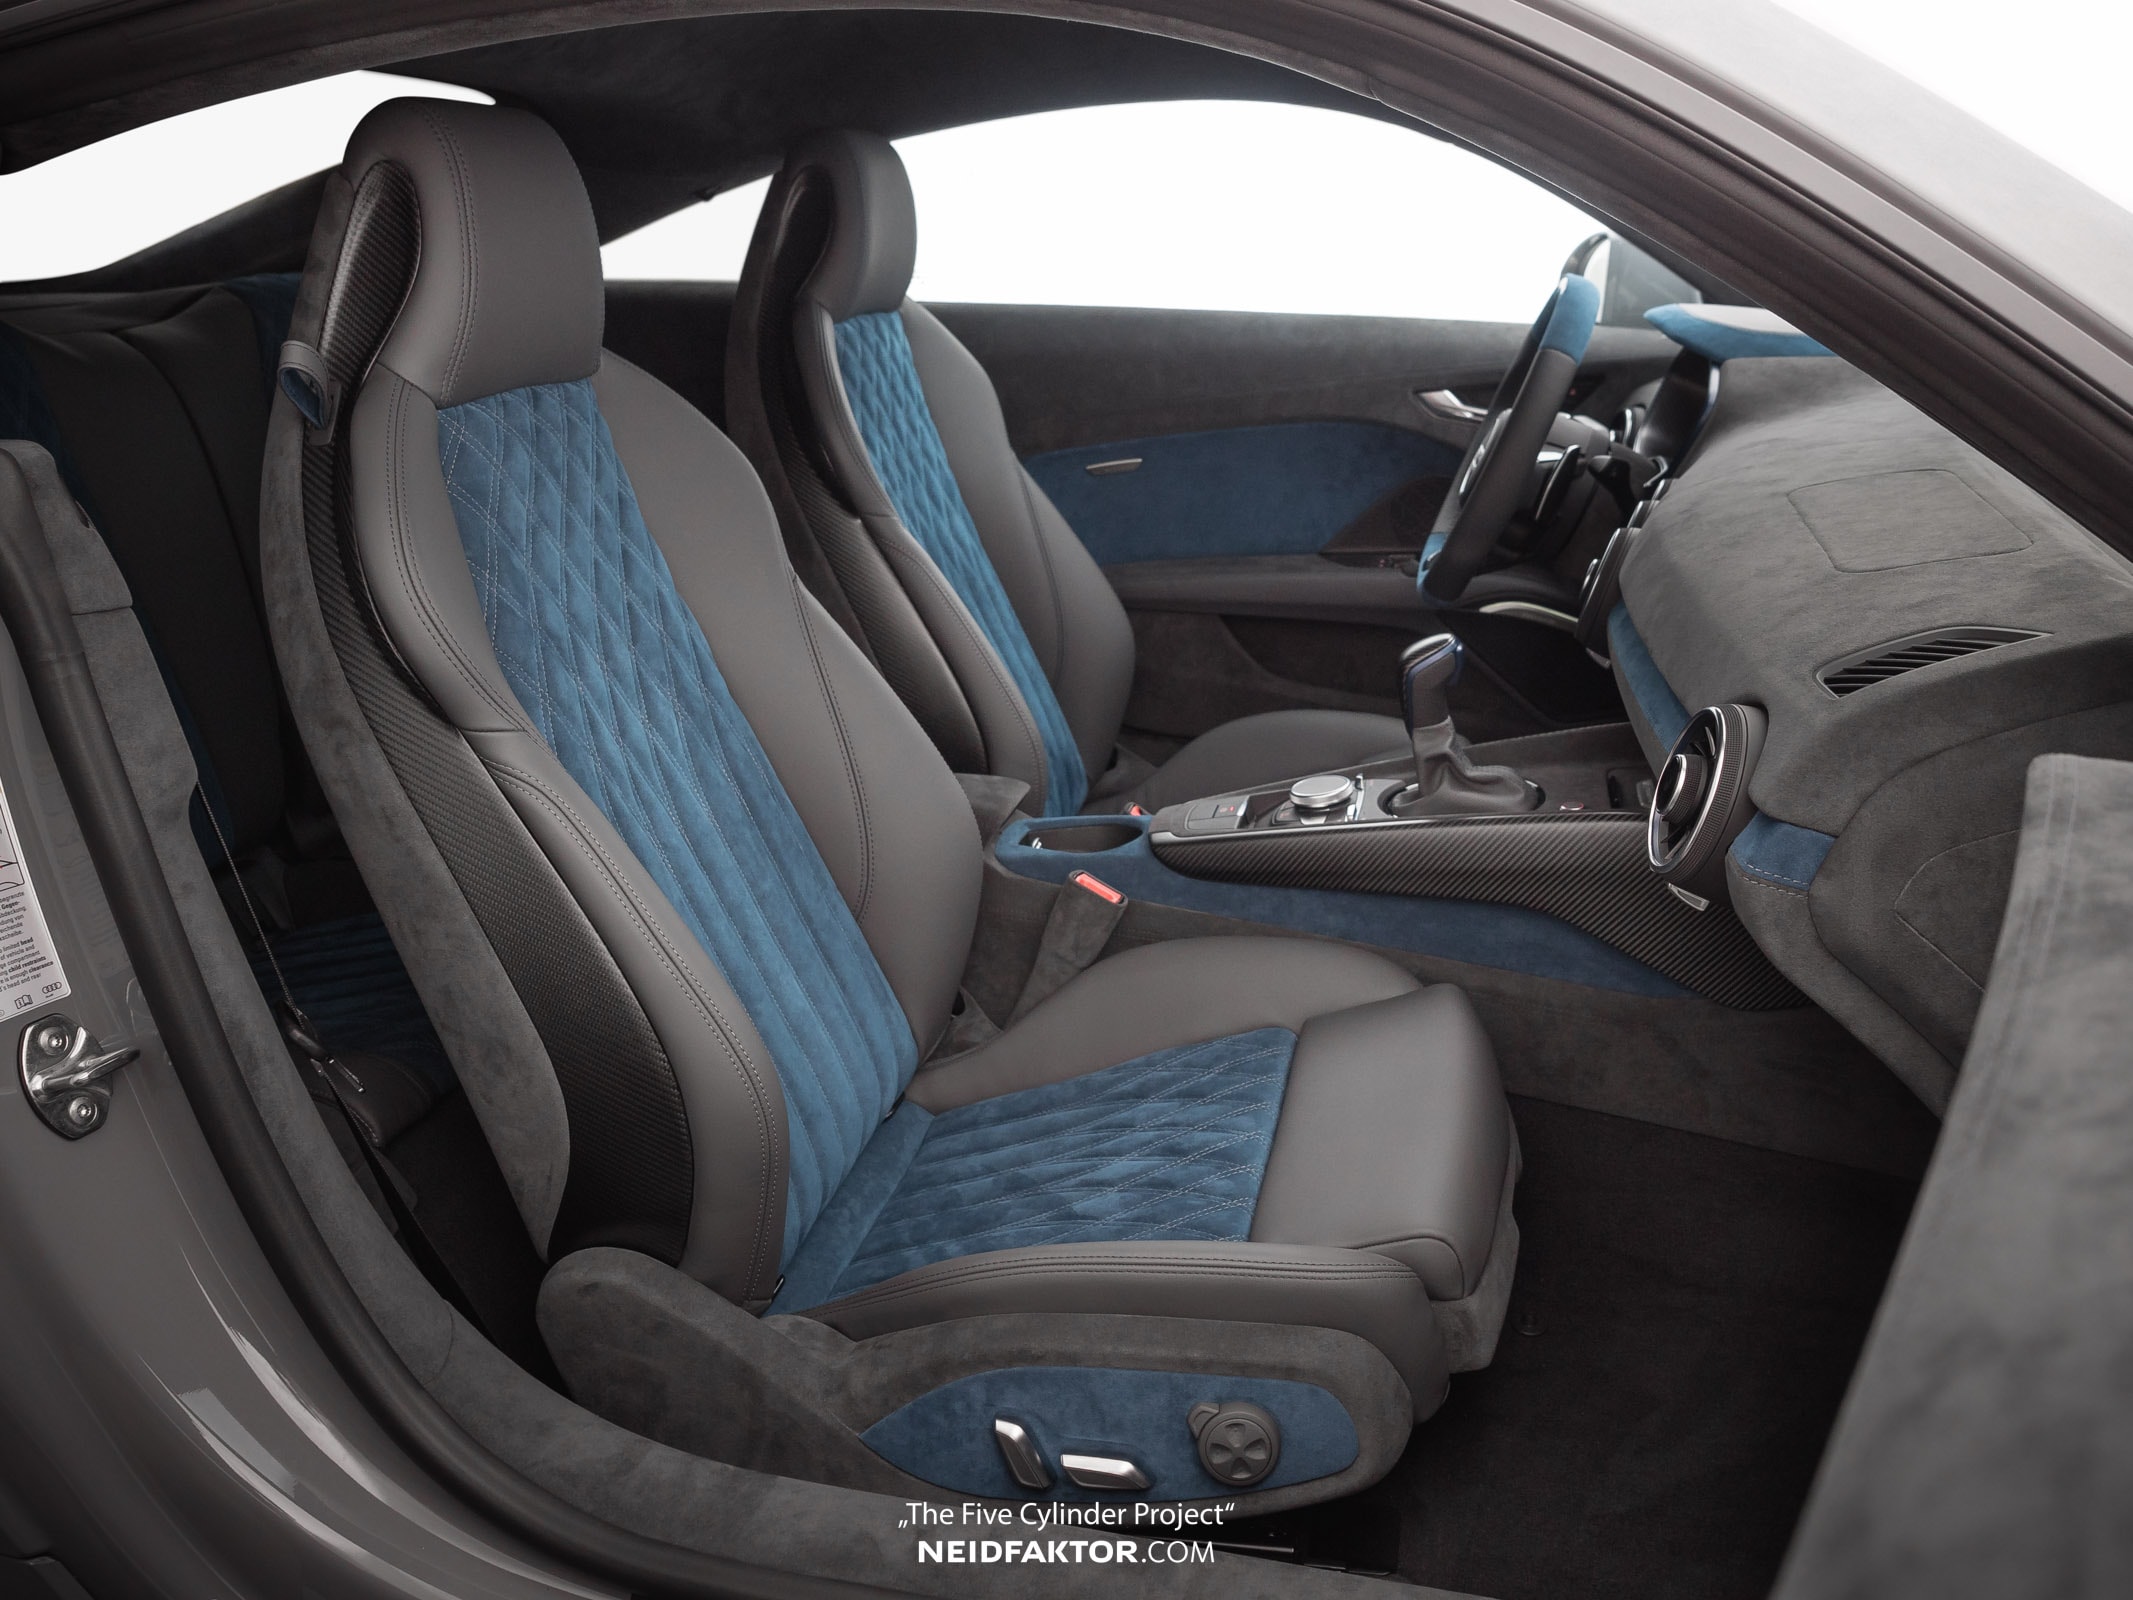 Audi Tt Rs With Custom Interior By Neidfaktor Is Even More